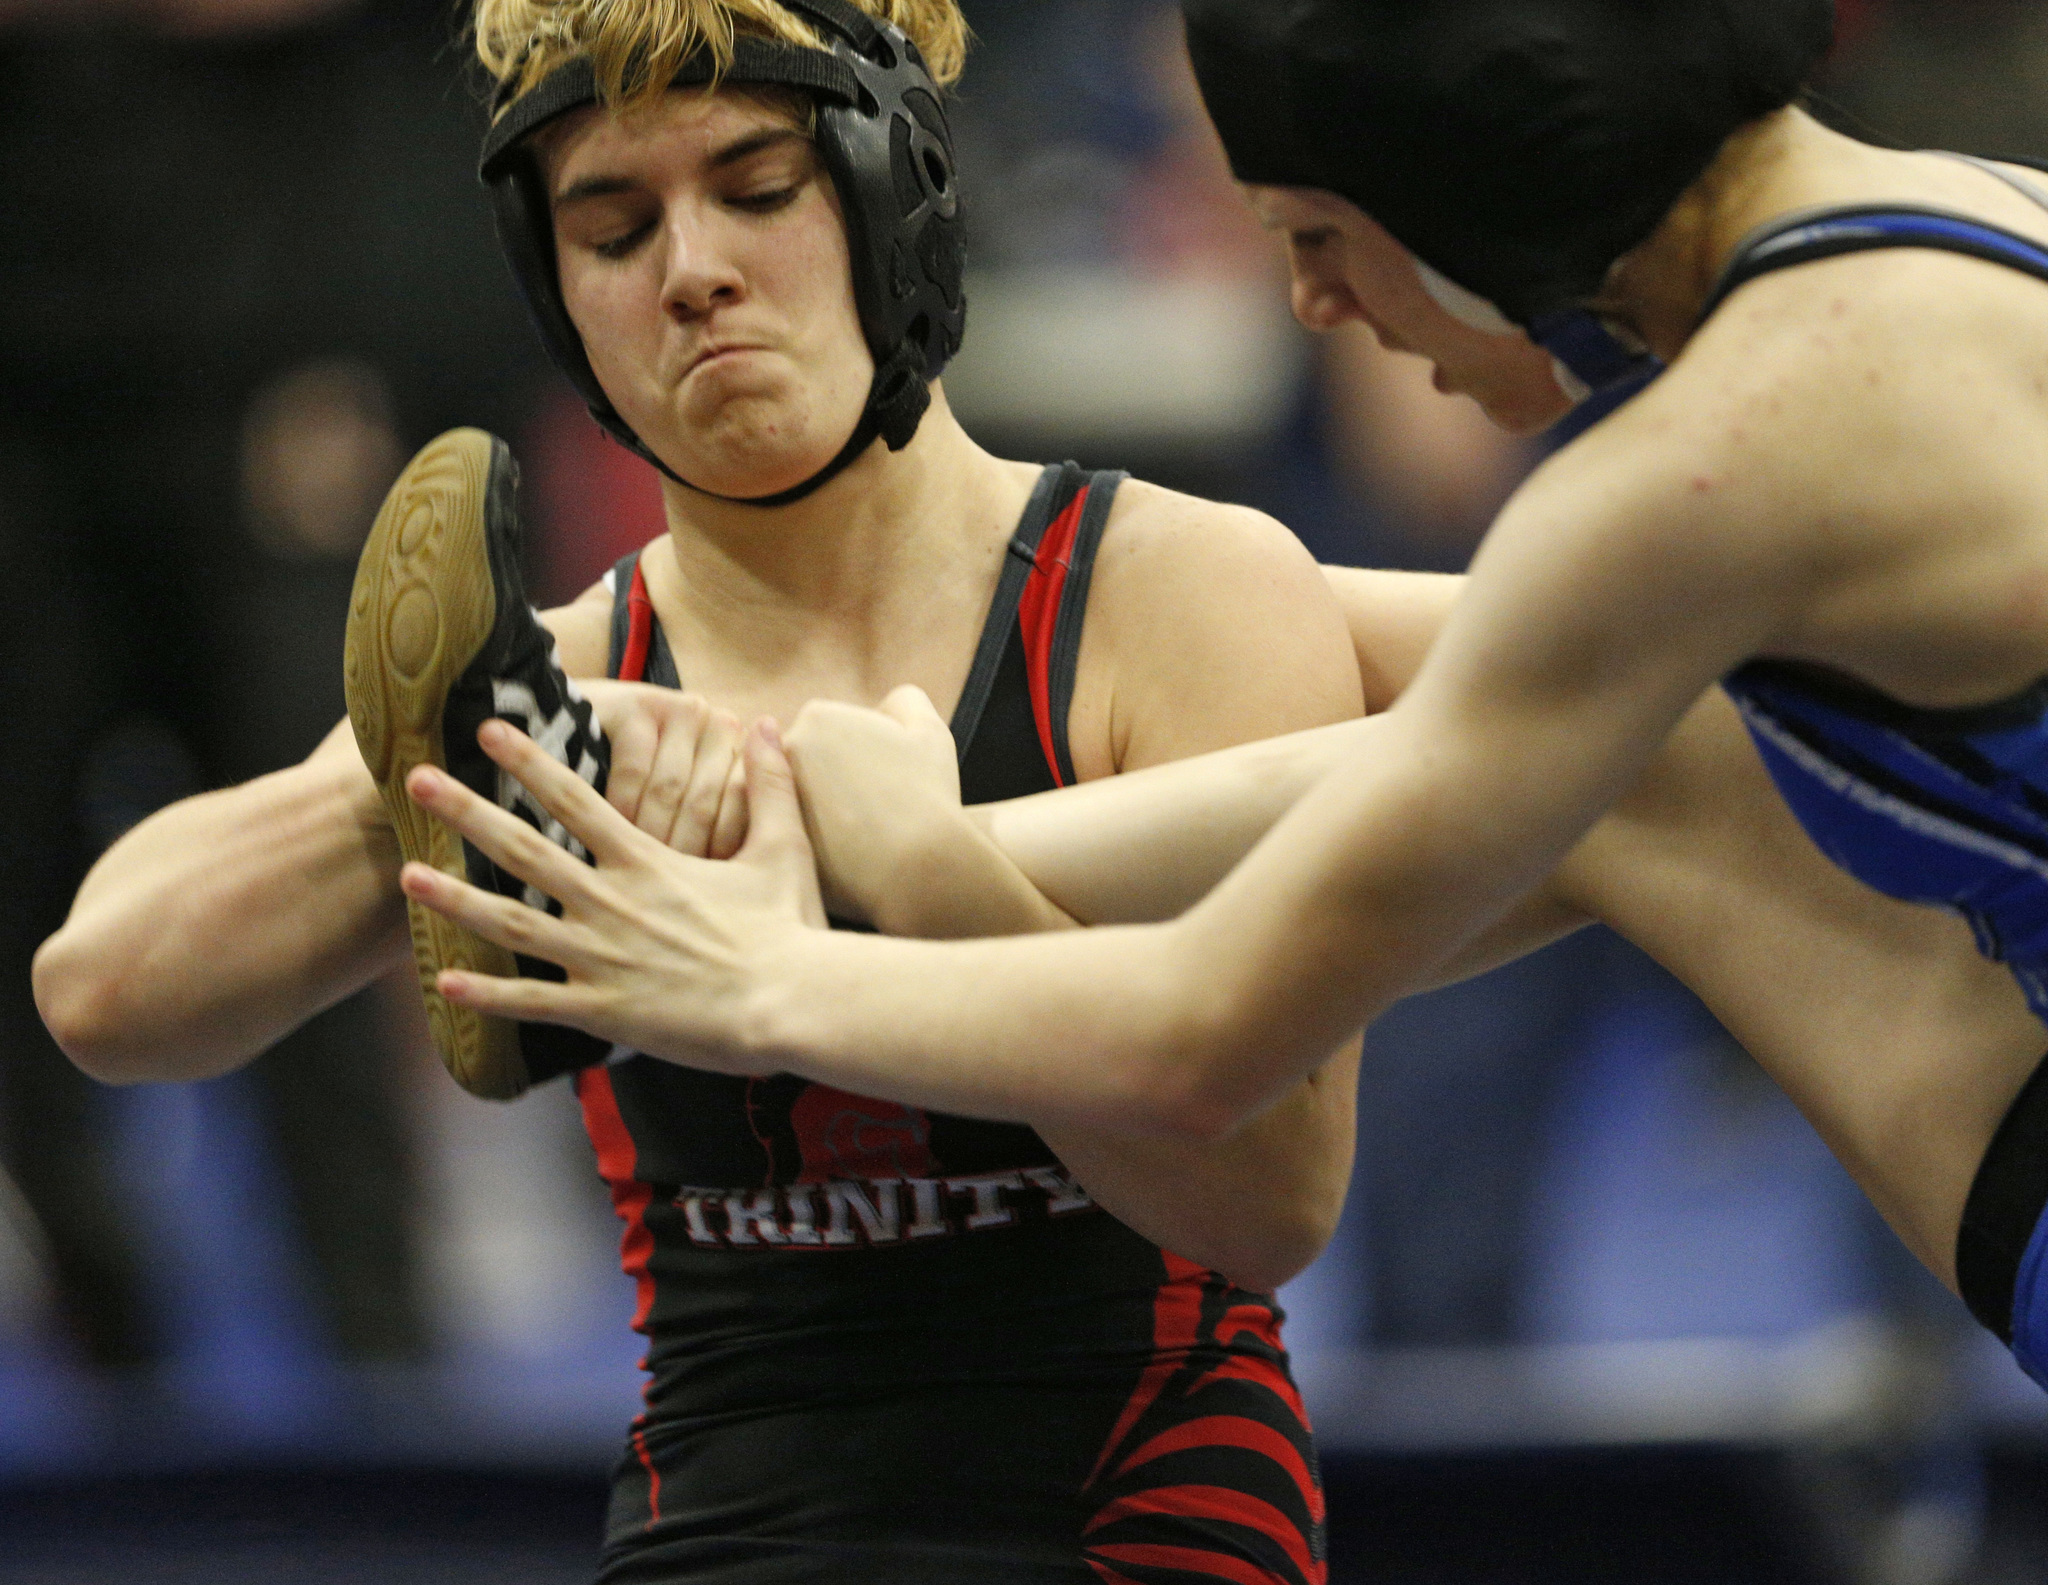 In this Feb. 18 photo, Euless Trinity’s Mack Beggs, left, wrestles Grand Prairie’s Kailyn Clay during the finals of the UIL Region 2-6A wrestling tournament at Allen High School in Allen, Texas. Beggs, who is transgender, is transitioning from female to male, won the girls regional championship after a female opponent forfeited the match. (Nathan Hunsinger | The Dallas Morning News)